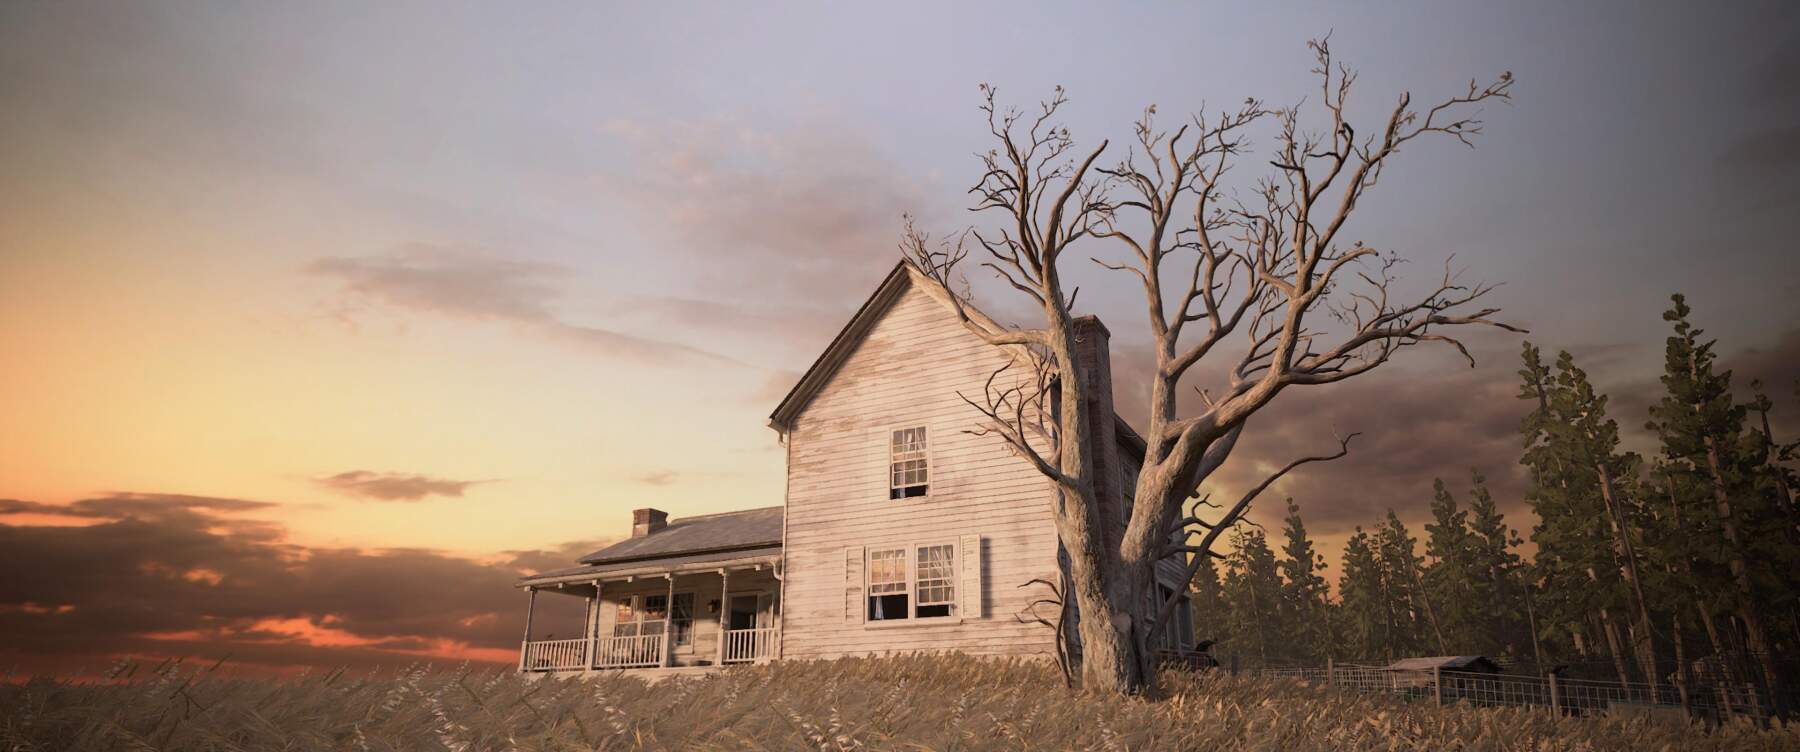 The Farmhouse, in "The Last of Us: Part II", captured by Marty Friedel